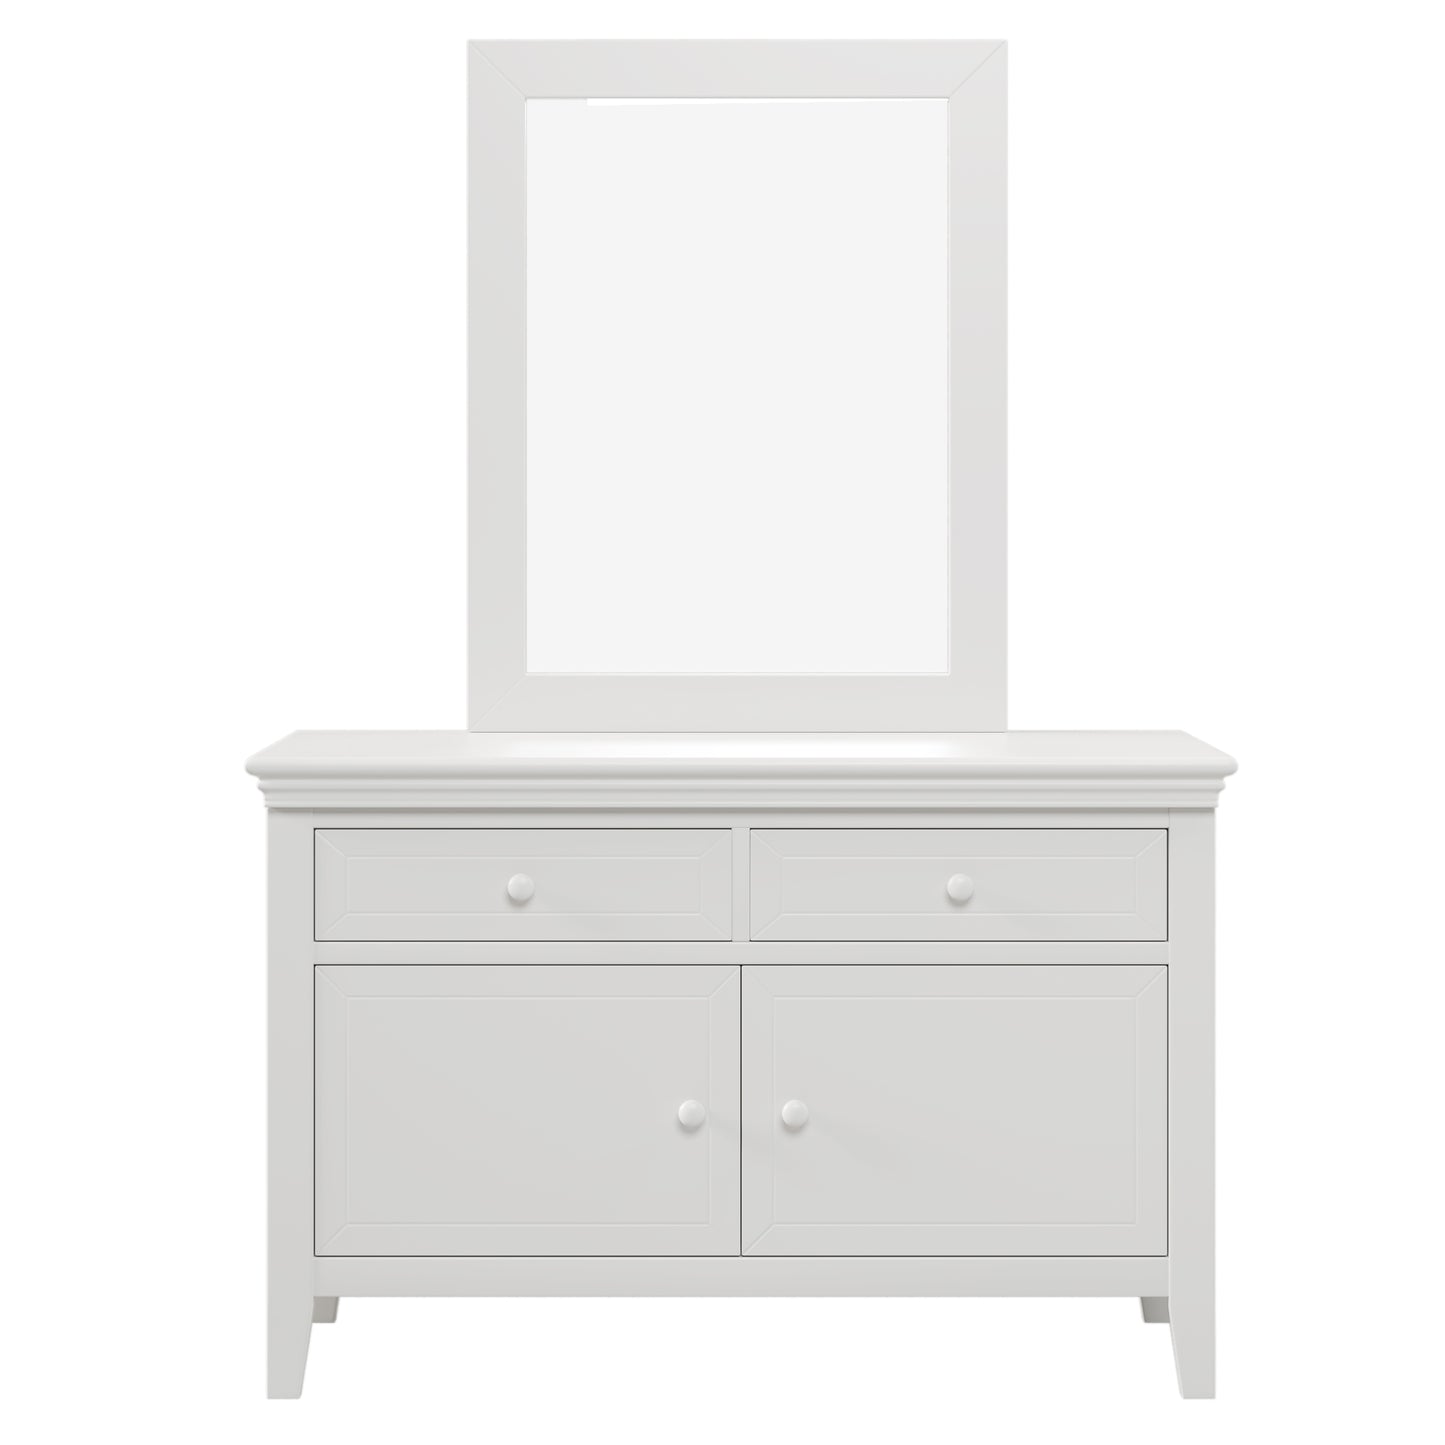 Traditional Concise Style White Solid Wood Dresser with Ample Storage Space Multiple Functions
Features